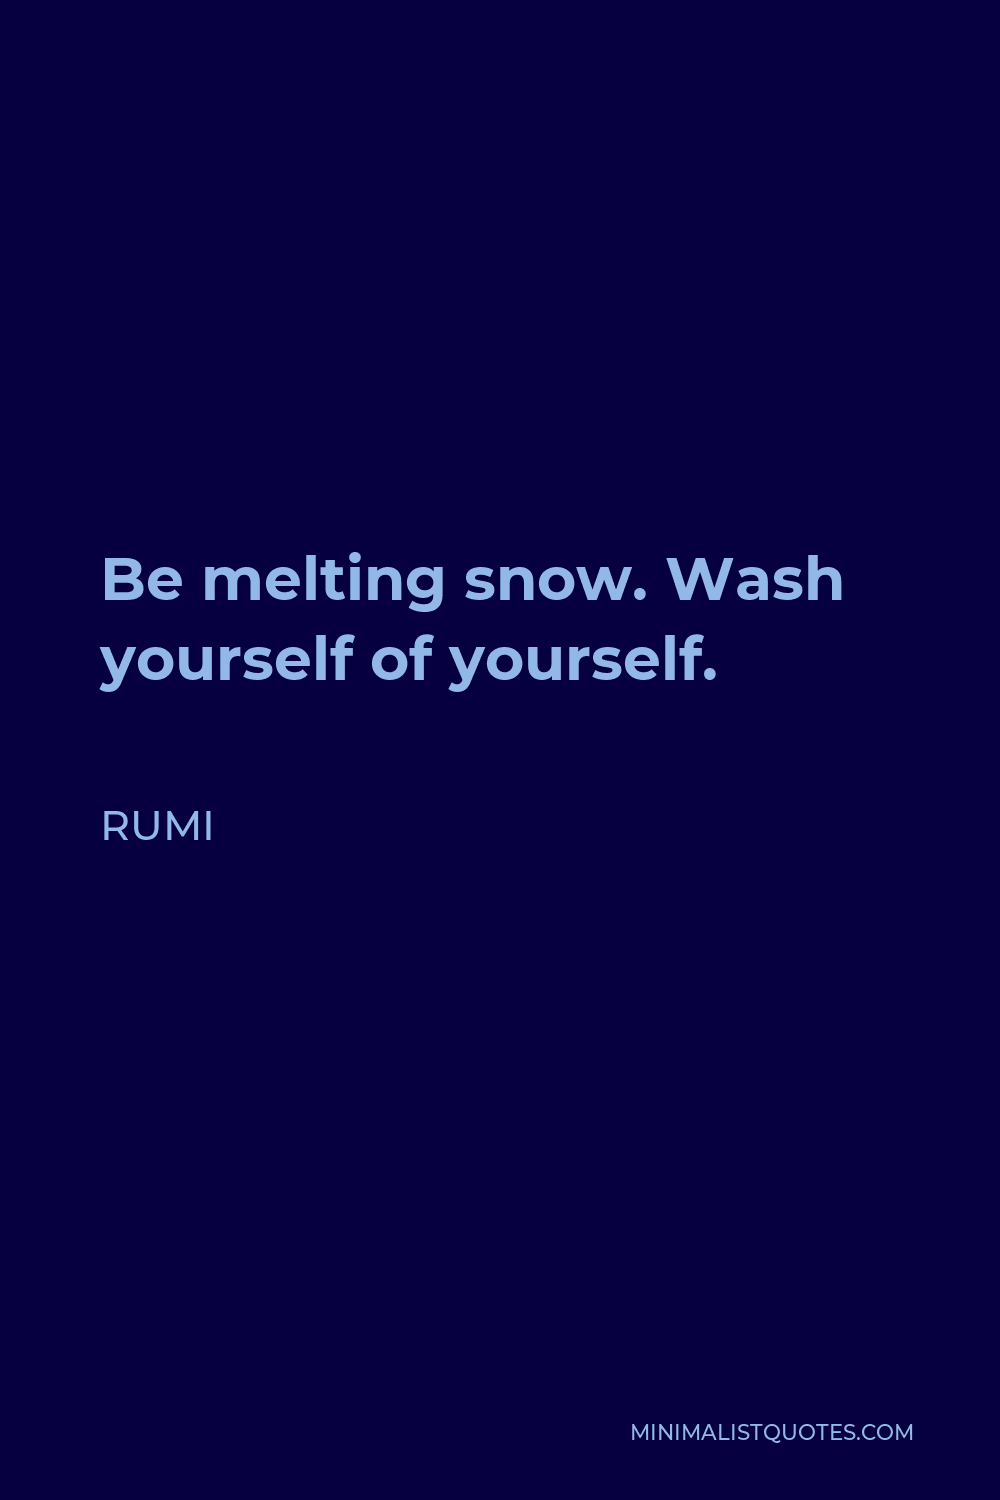 Rumi Quote - Be melting snow. Wash yourself of yourself.